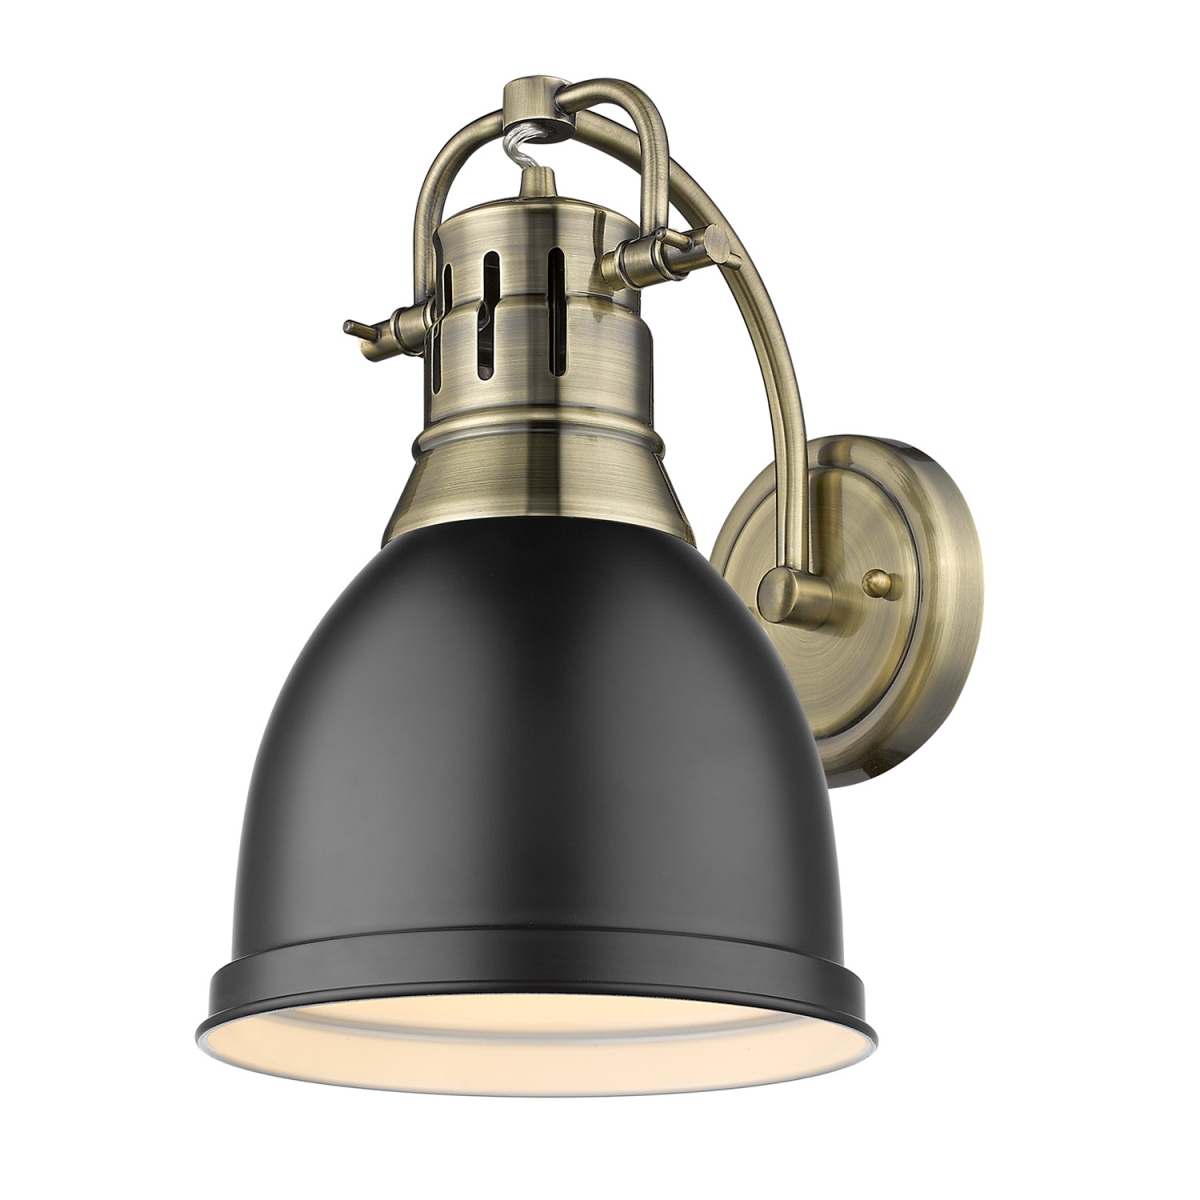 3602-1w Ab-blk Duncan 1 Light Wall Sconce With Matte Black Shade, Aged Brass